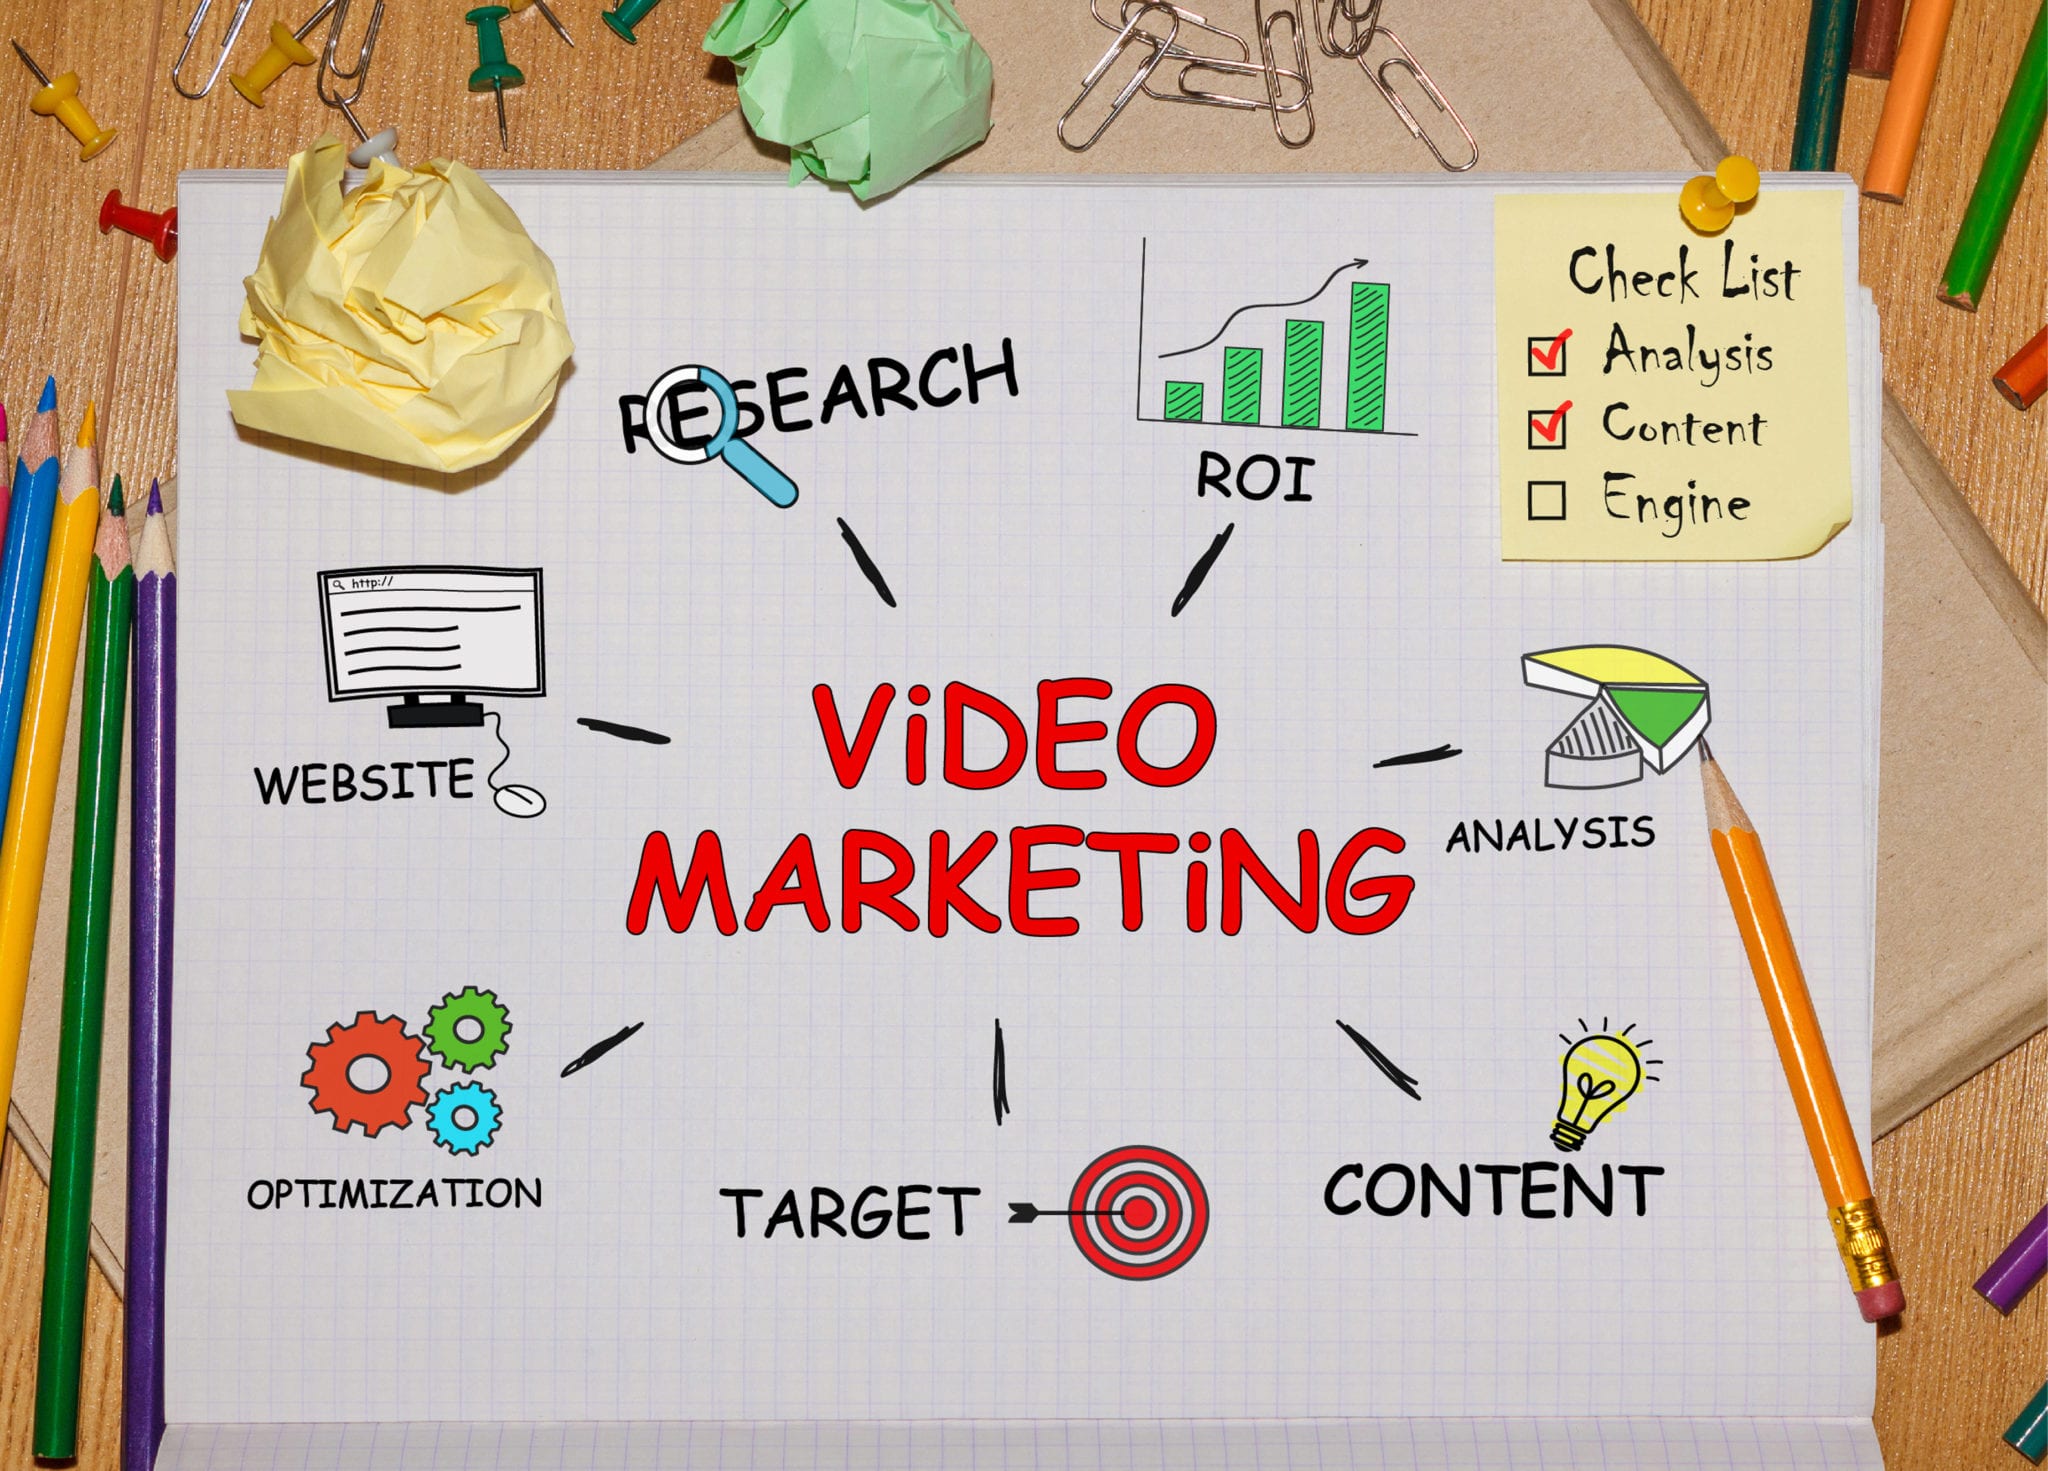 Looking for Leads? Venture into Video!